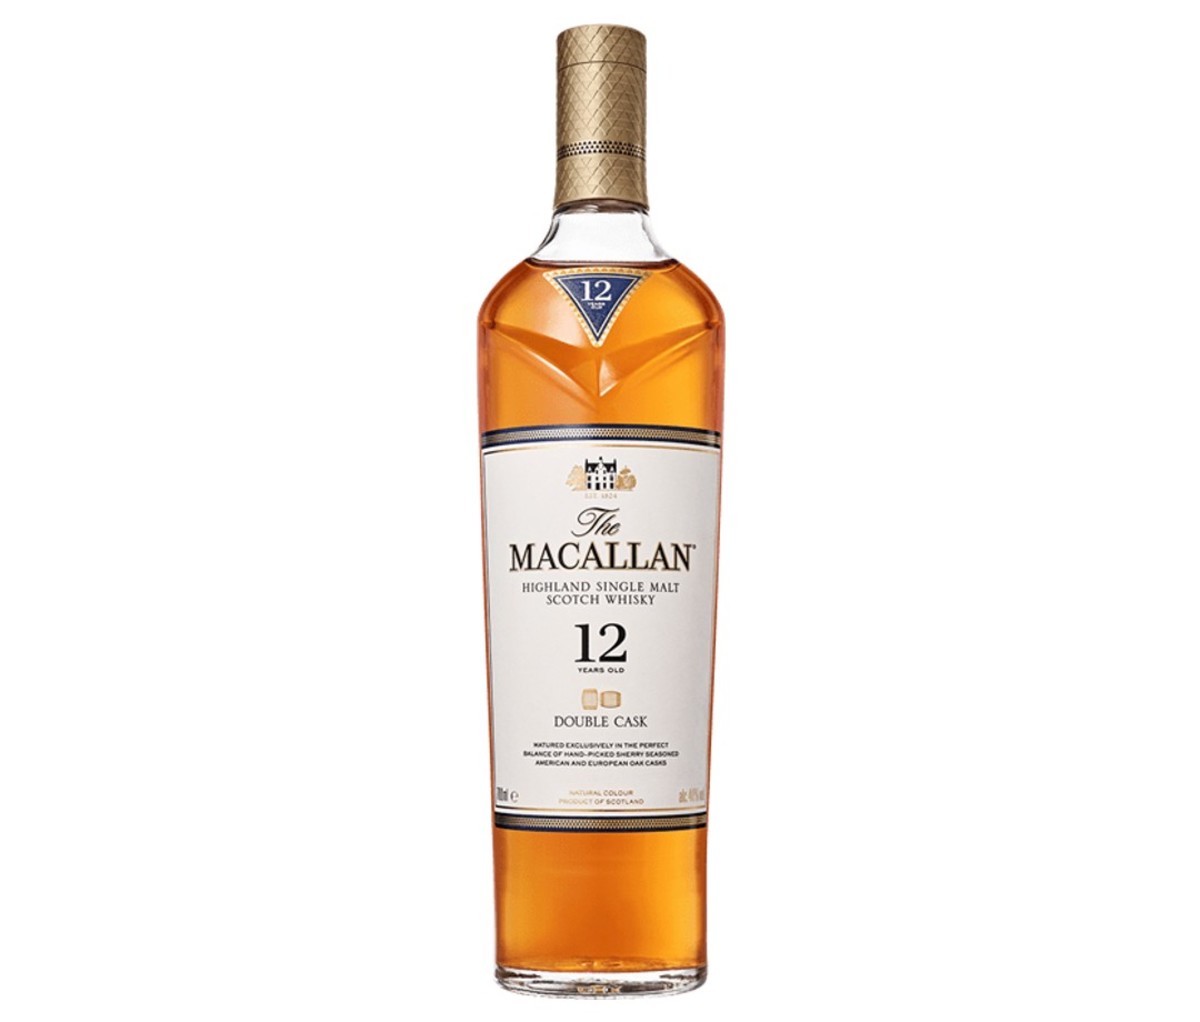 A bottle of The Macallan 12 Year Double Cask